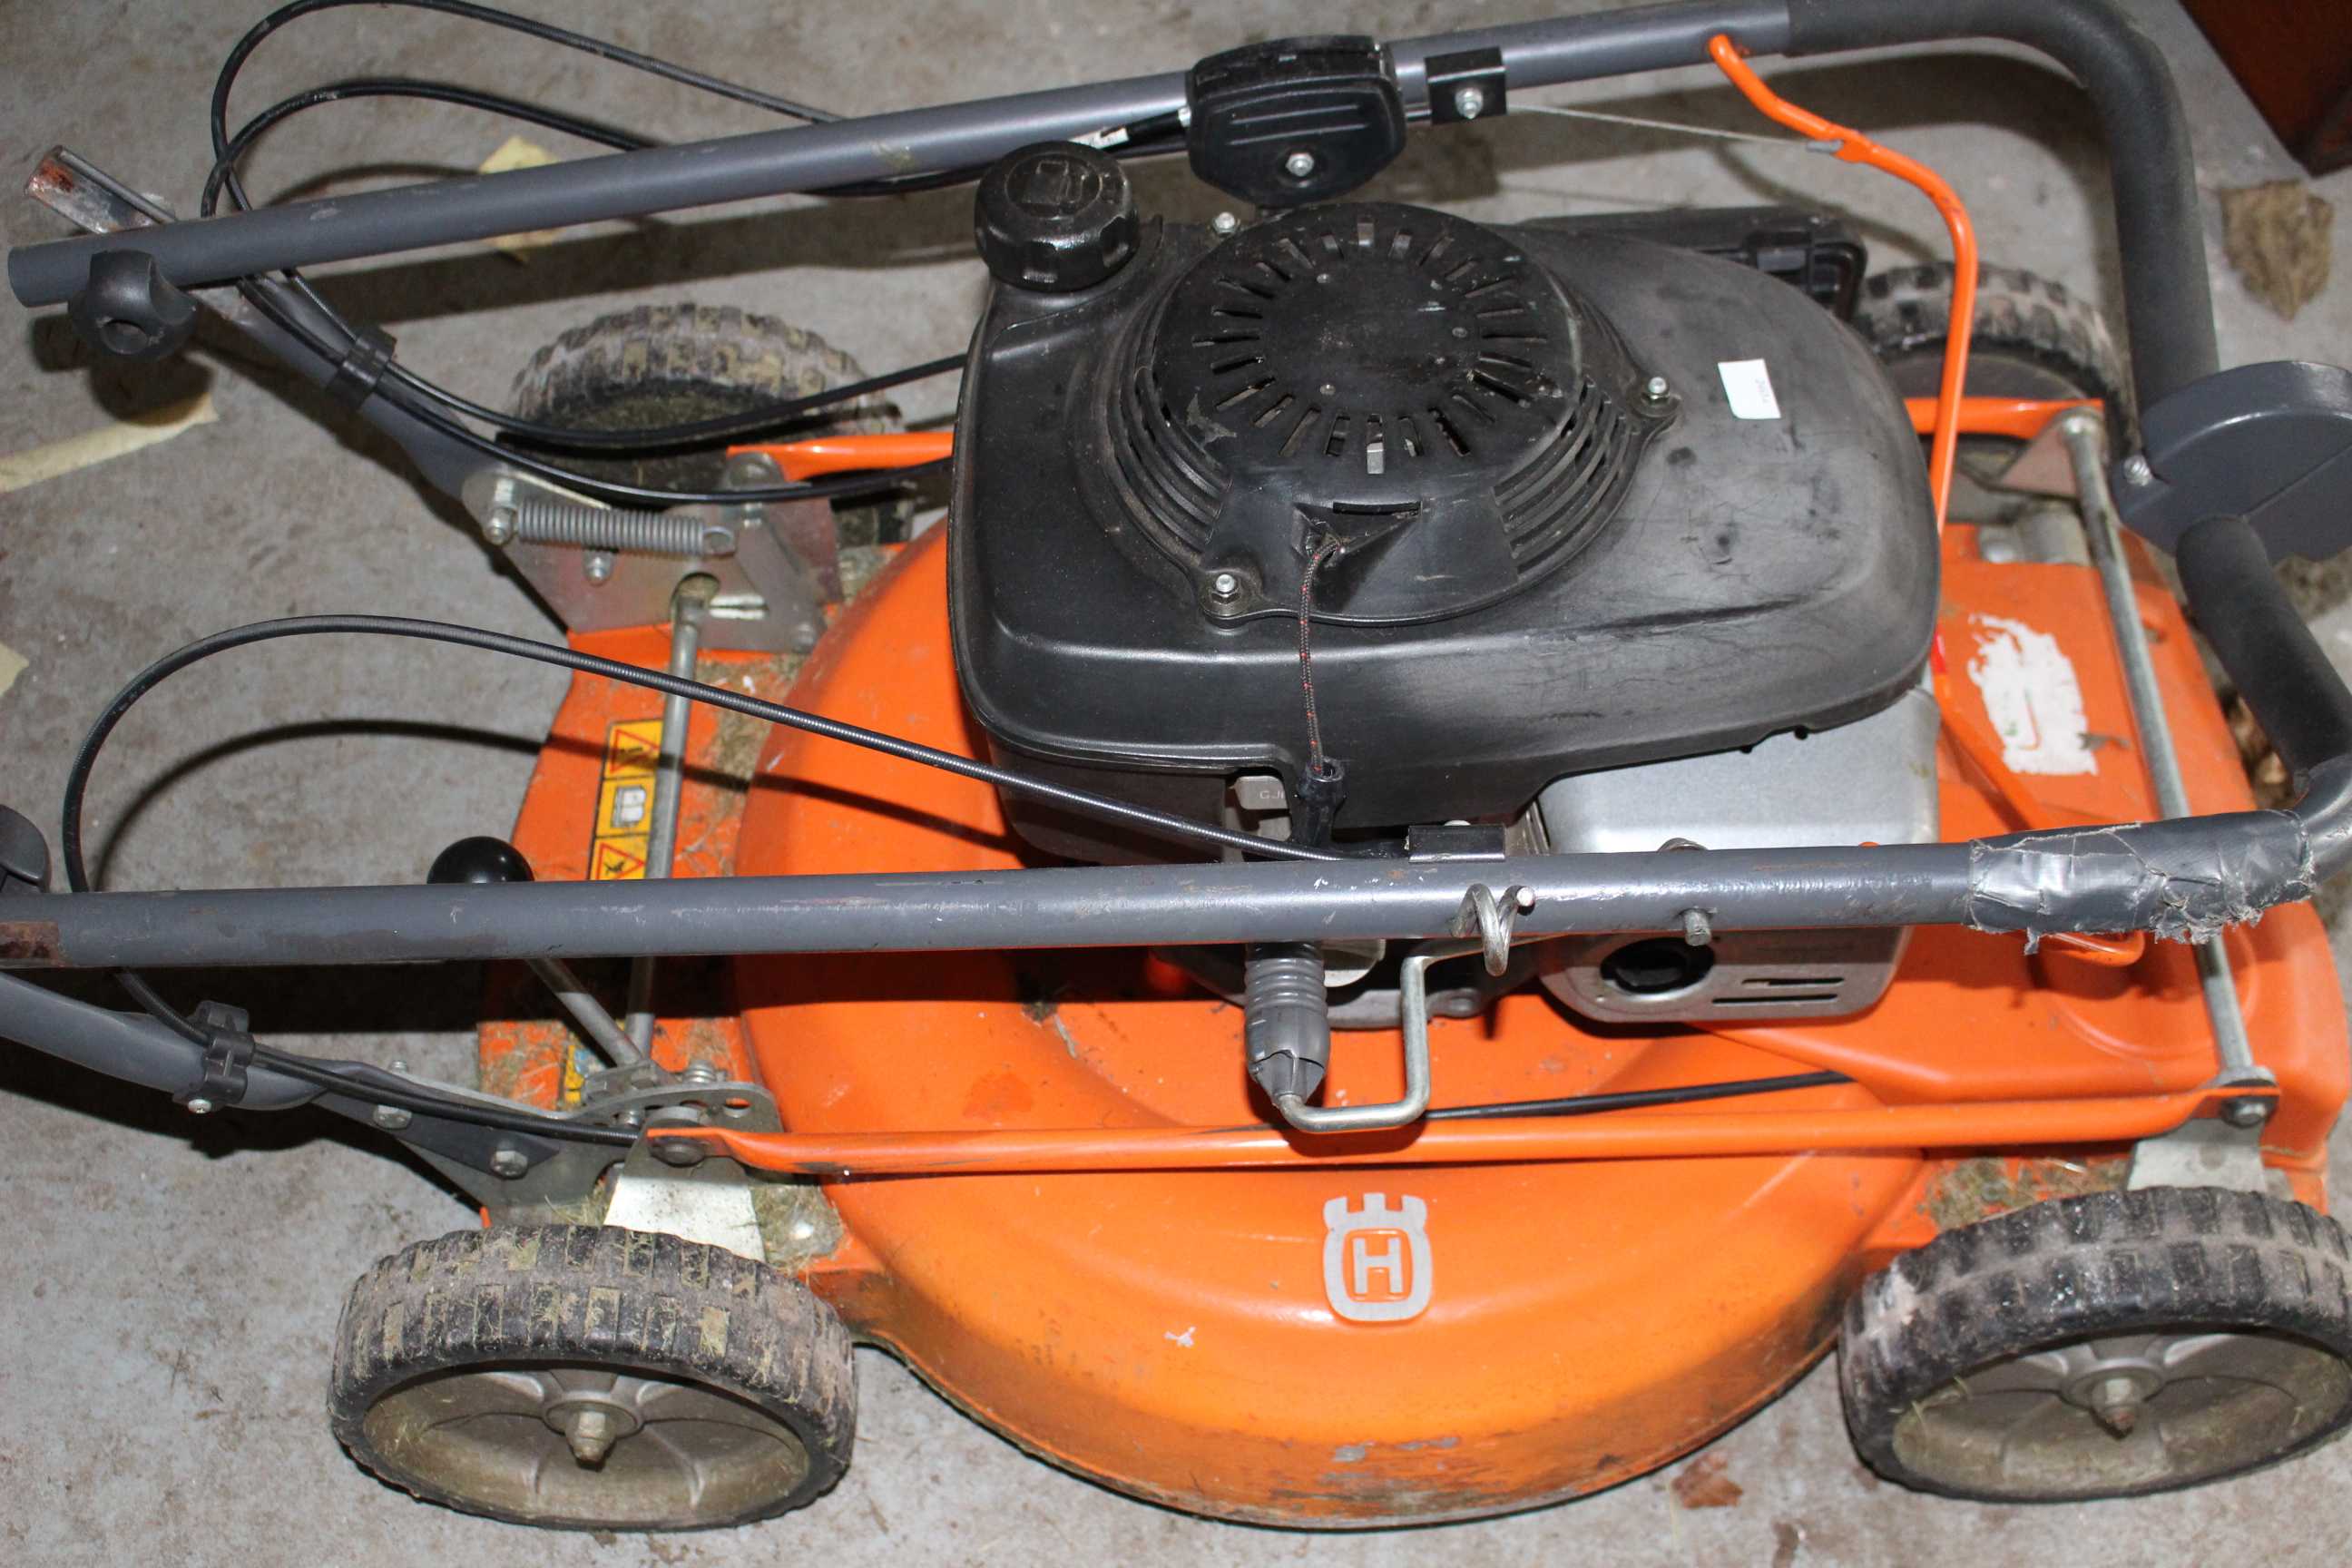 Husqvarna pull start petrol lawn mower with large cutting area. (selling as untested) - Image 3 of 4